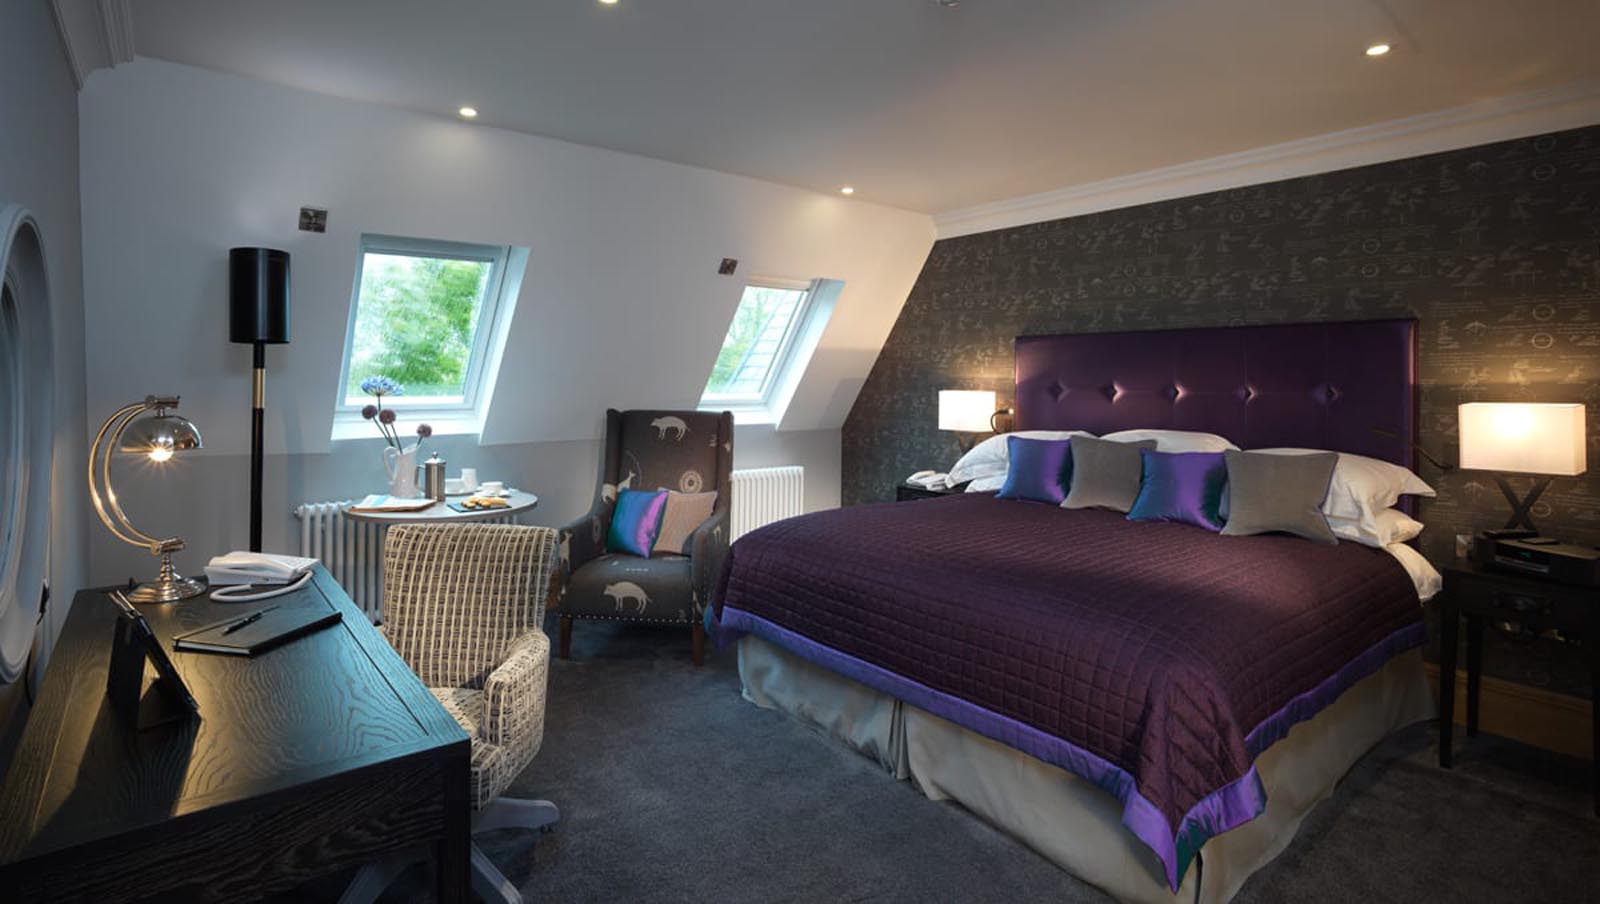 One of our classic rooms with a large double bed, seating area and desk